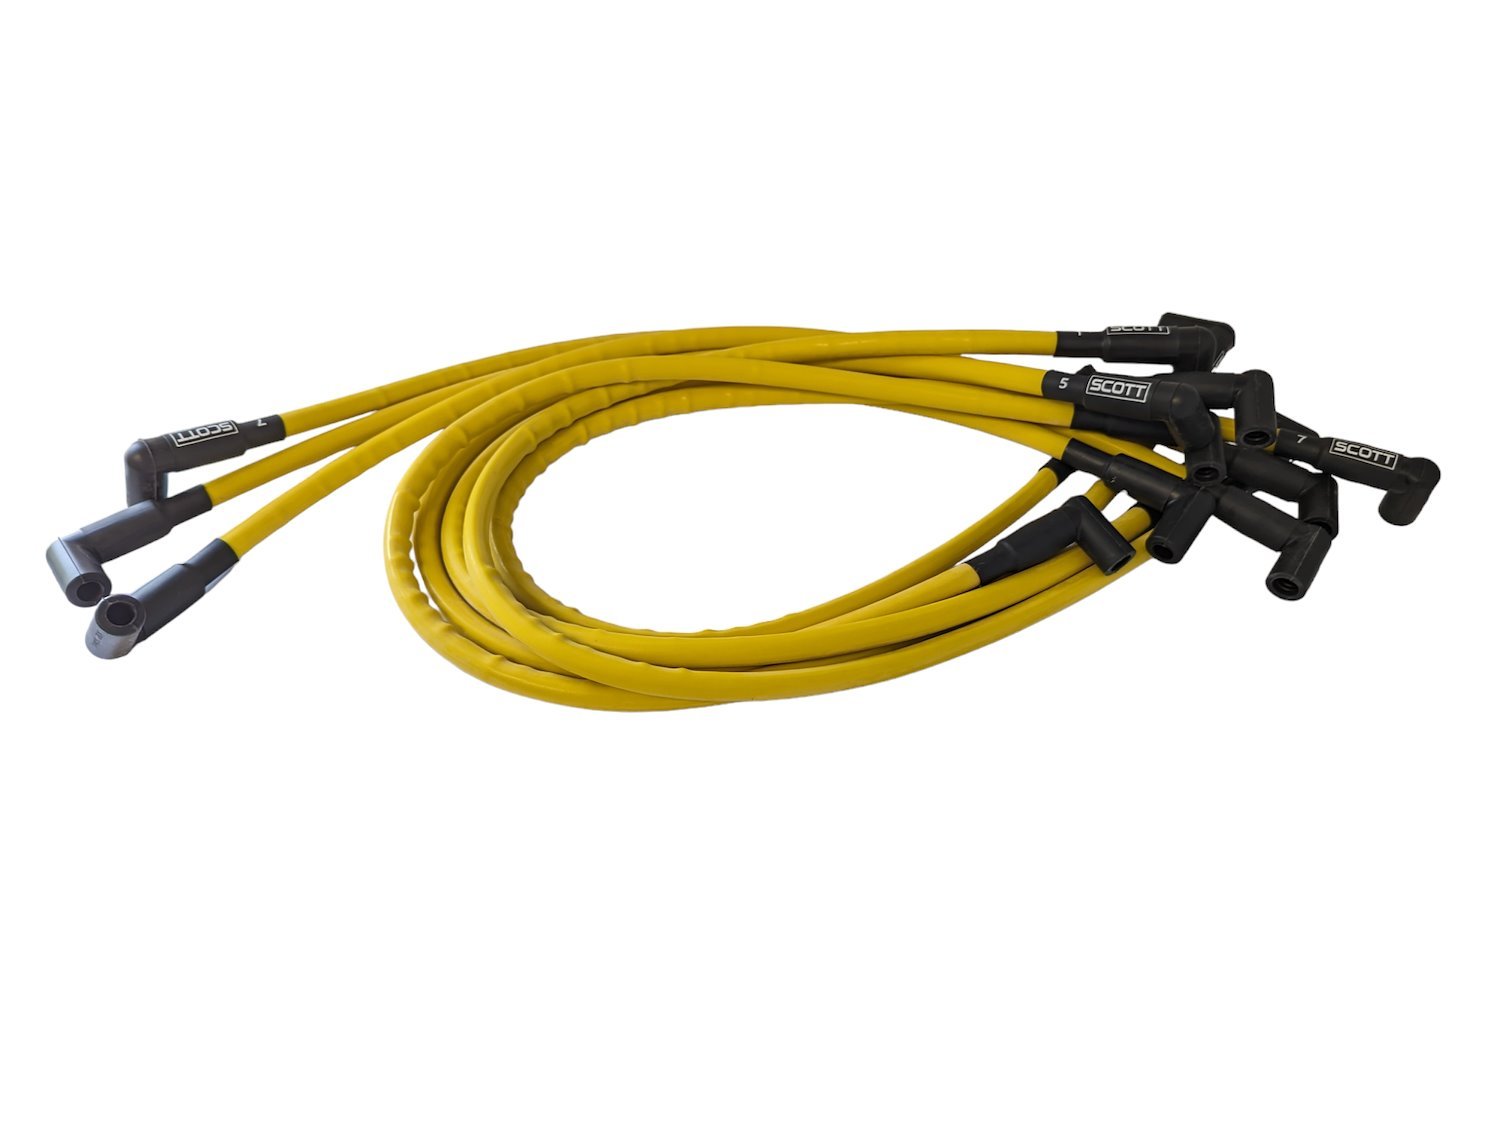 SPW-CH-604-7 High-Performance Silicone-Sleeved Spark Plug Wire Set for Small Block Chevy 604 Crate, Under Header [Yellow]